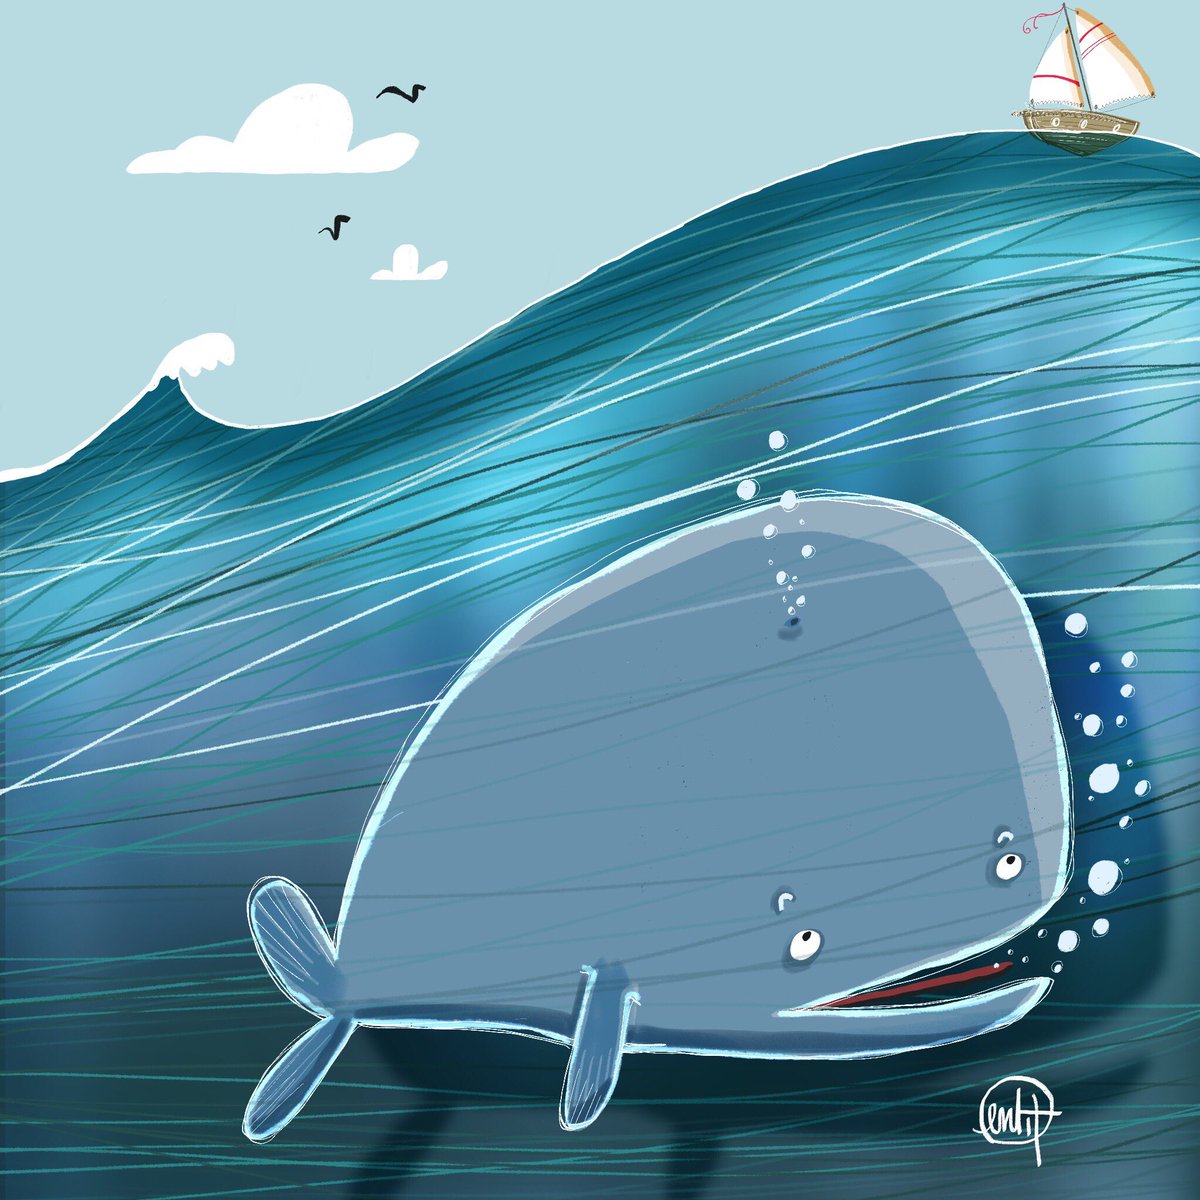 Just an happy #Whale as #saturdayscribbles entry! @SatScribbles 
#HappyWeekend you all!